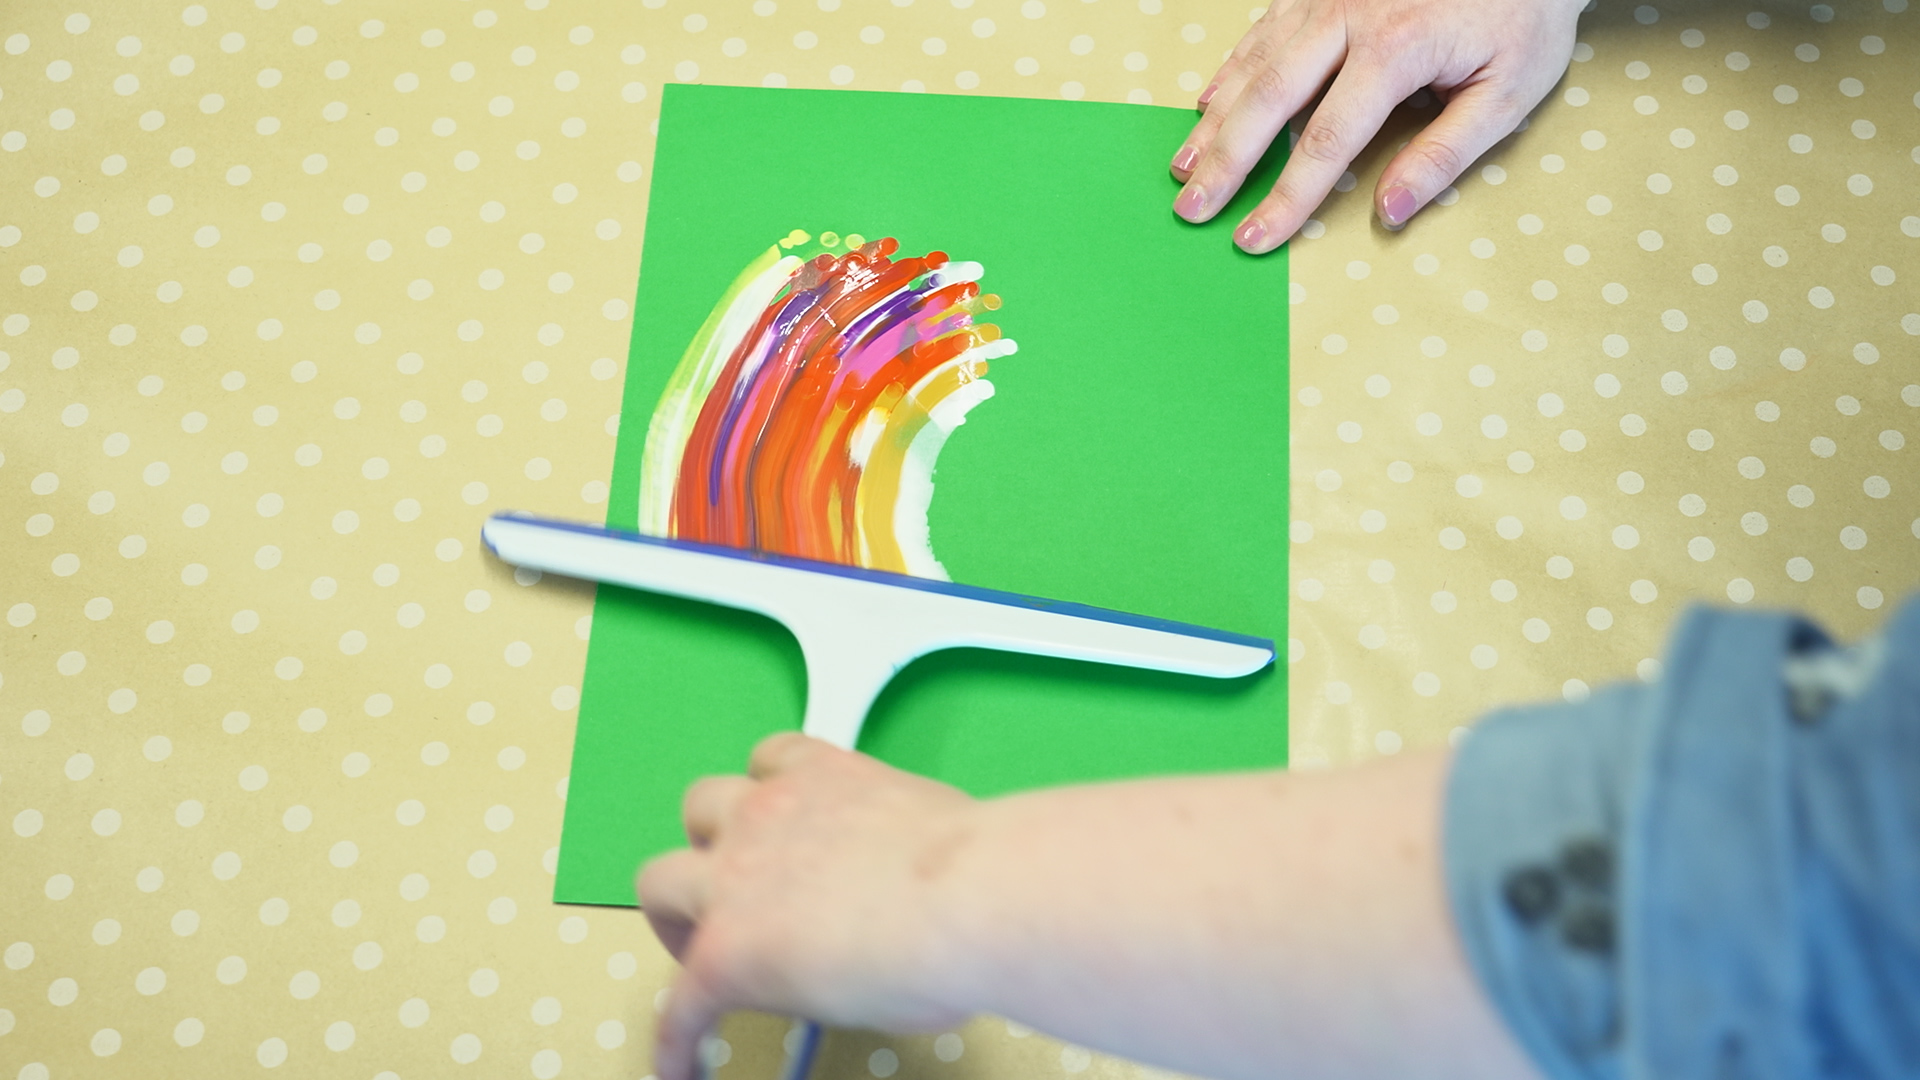 A squeegee being used to paint on a piece of paper